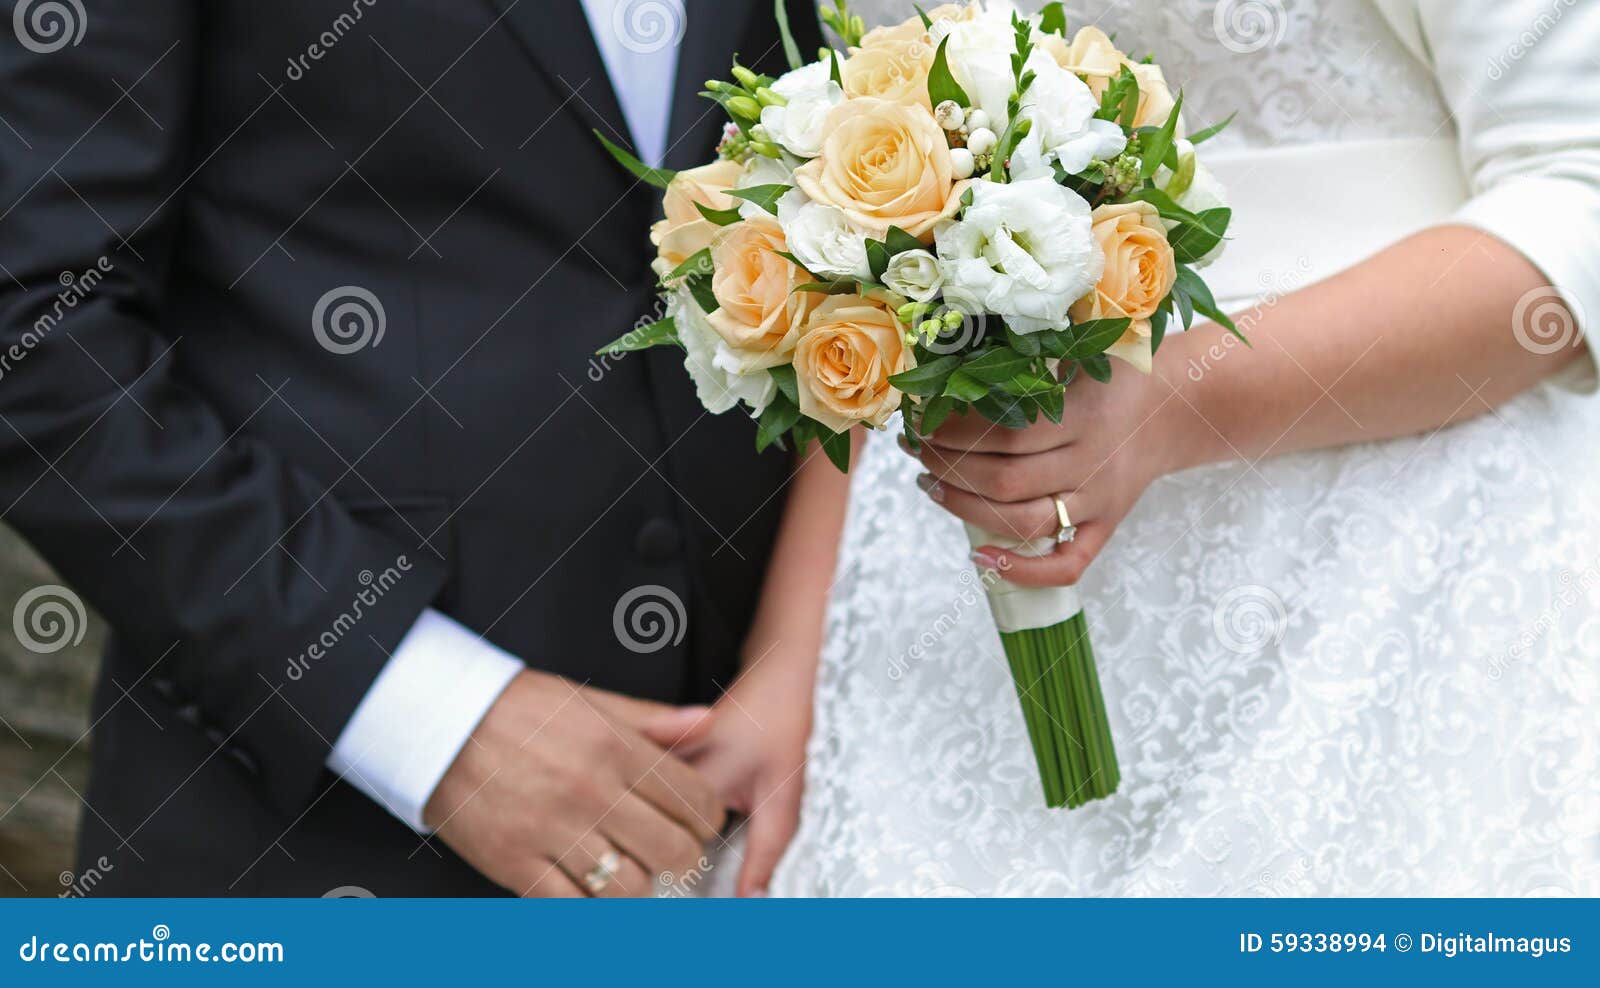 Bride Hands Holding Wedding Bouquet Stock Photo - Image of floral ...